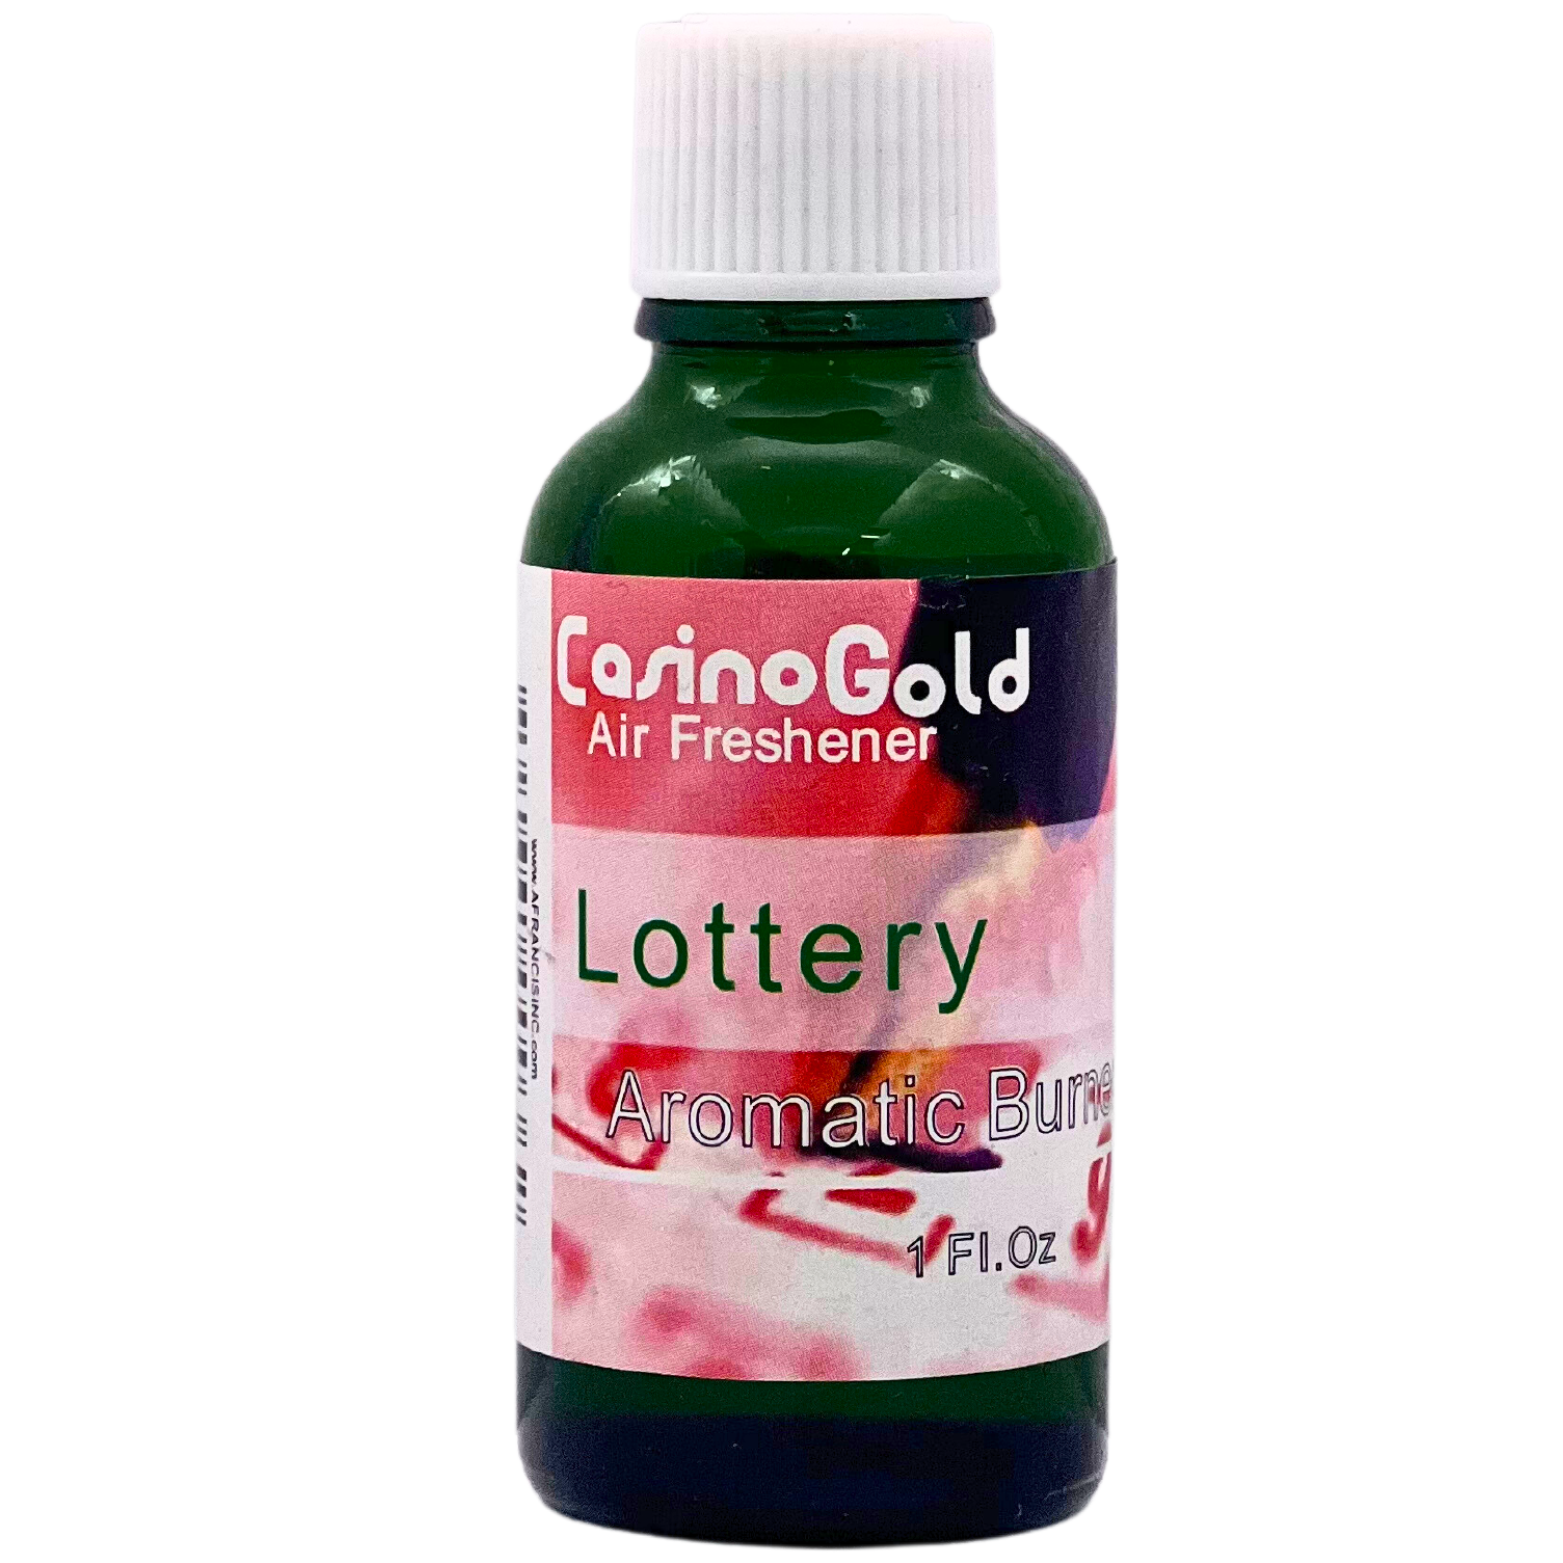 Casino Gold 1 Ounce Lottery Fragrance Oil